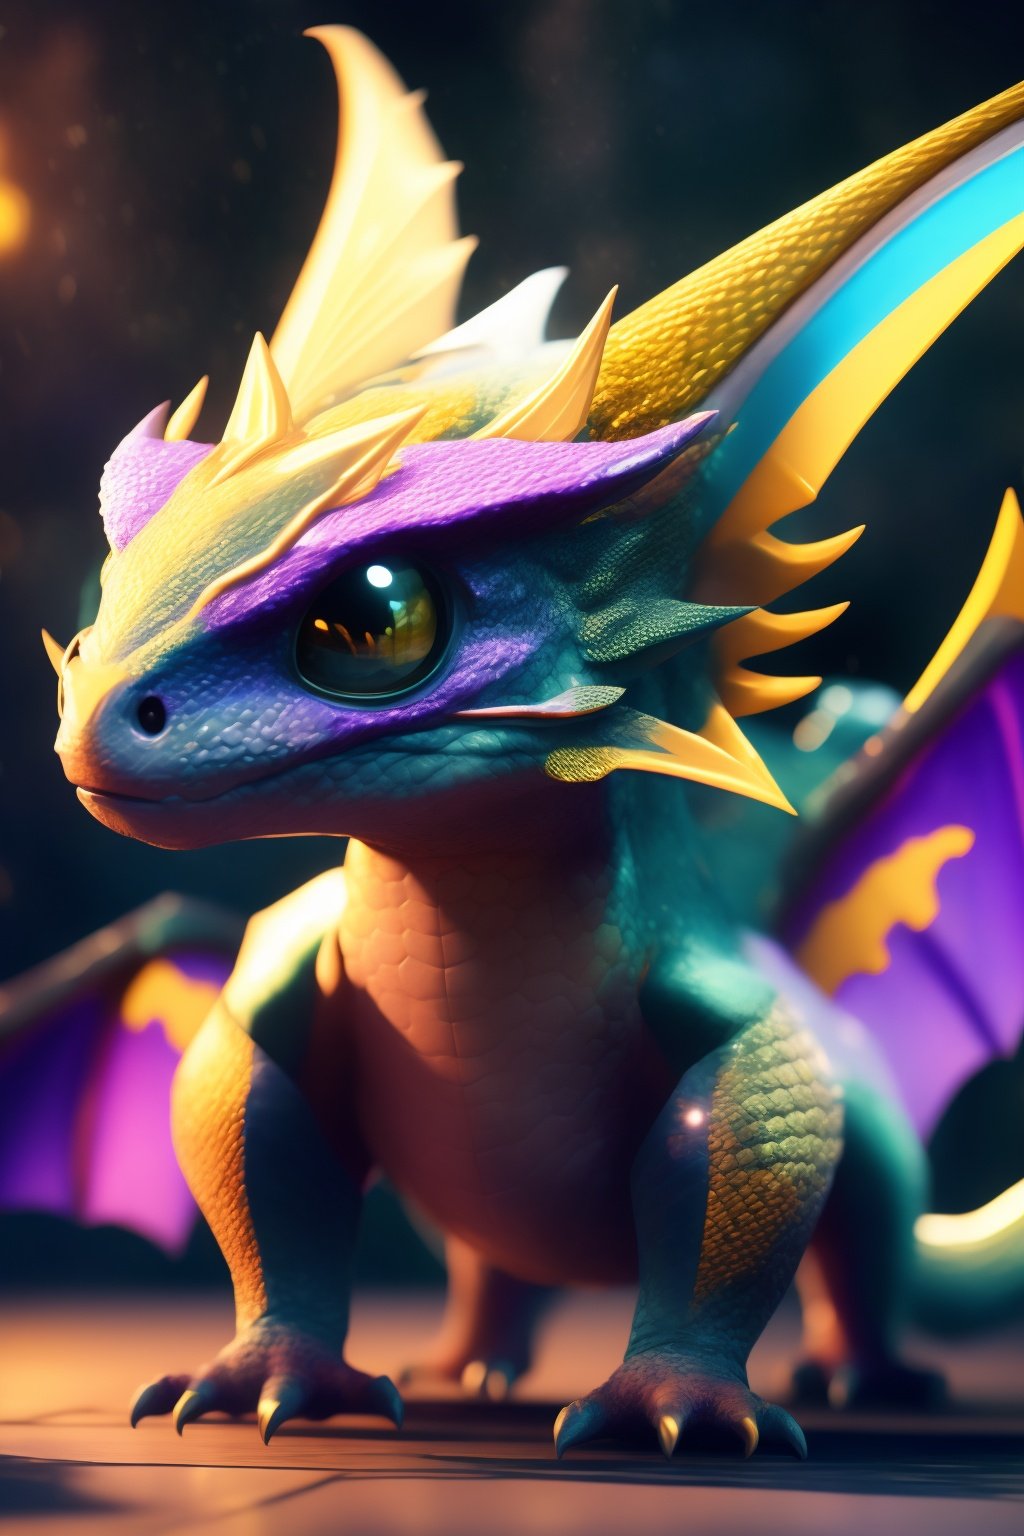 baby dragon, cinematic background, vibrant colors, UHD, 16k, 3D rendering, detailed scales, adorable face and expression, sparkling eyes, fluffy wings, playful pose, magical atmosphere, realistic textures, professional artwork, fantasy art style, mystical lighting, captivating composition, epic fantasy scene